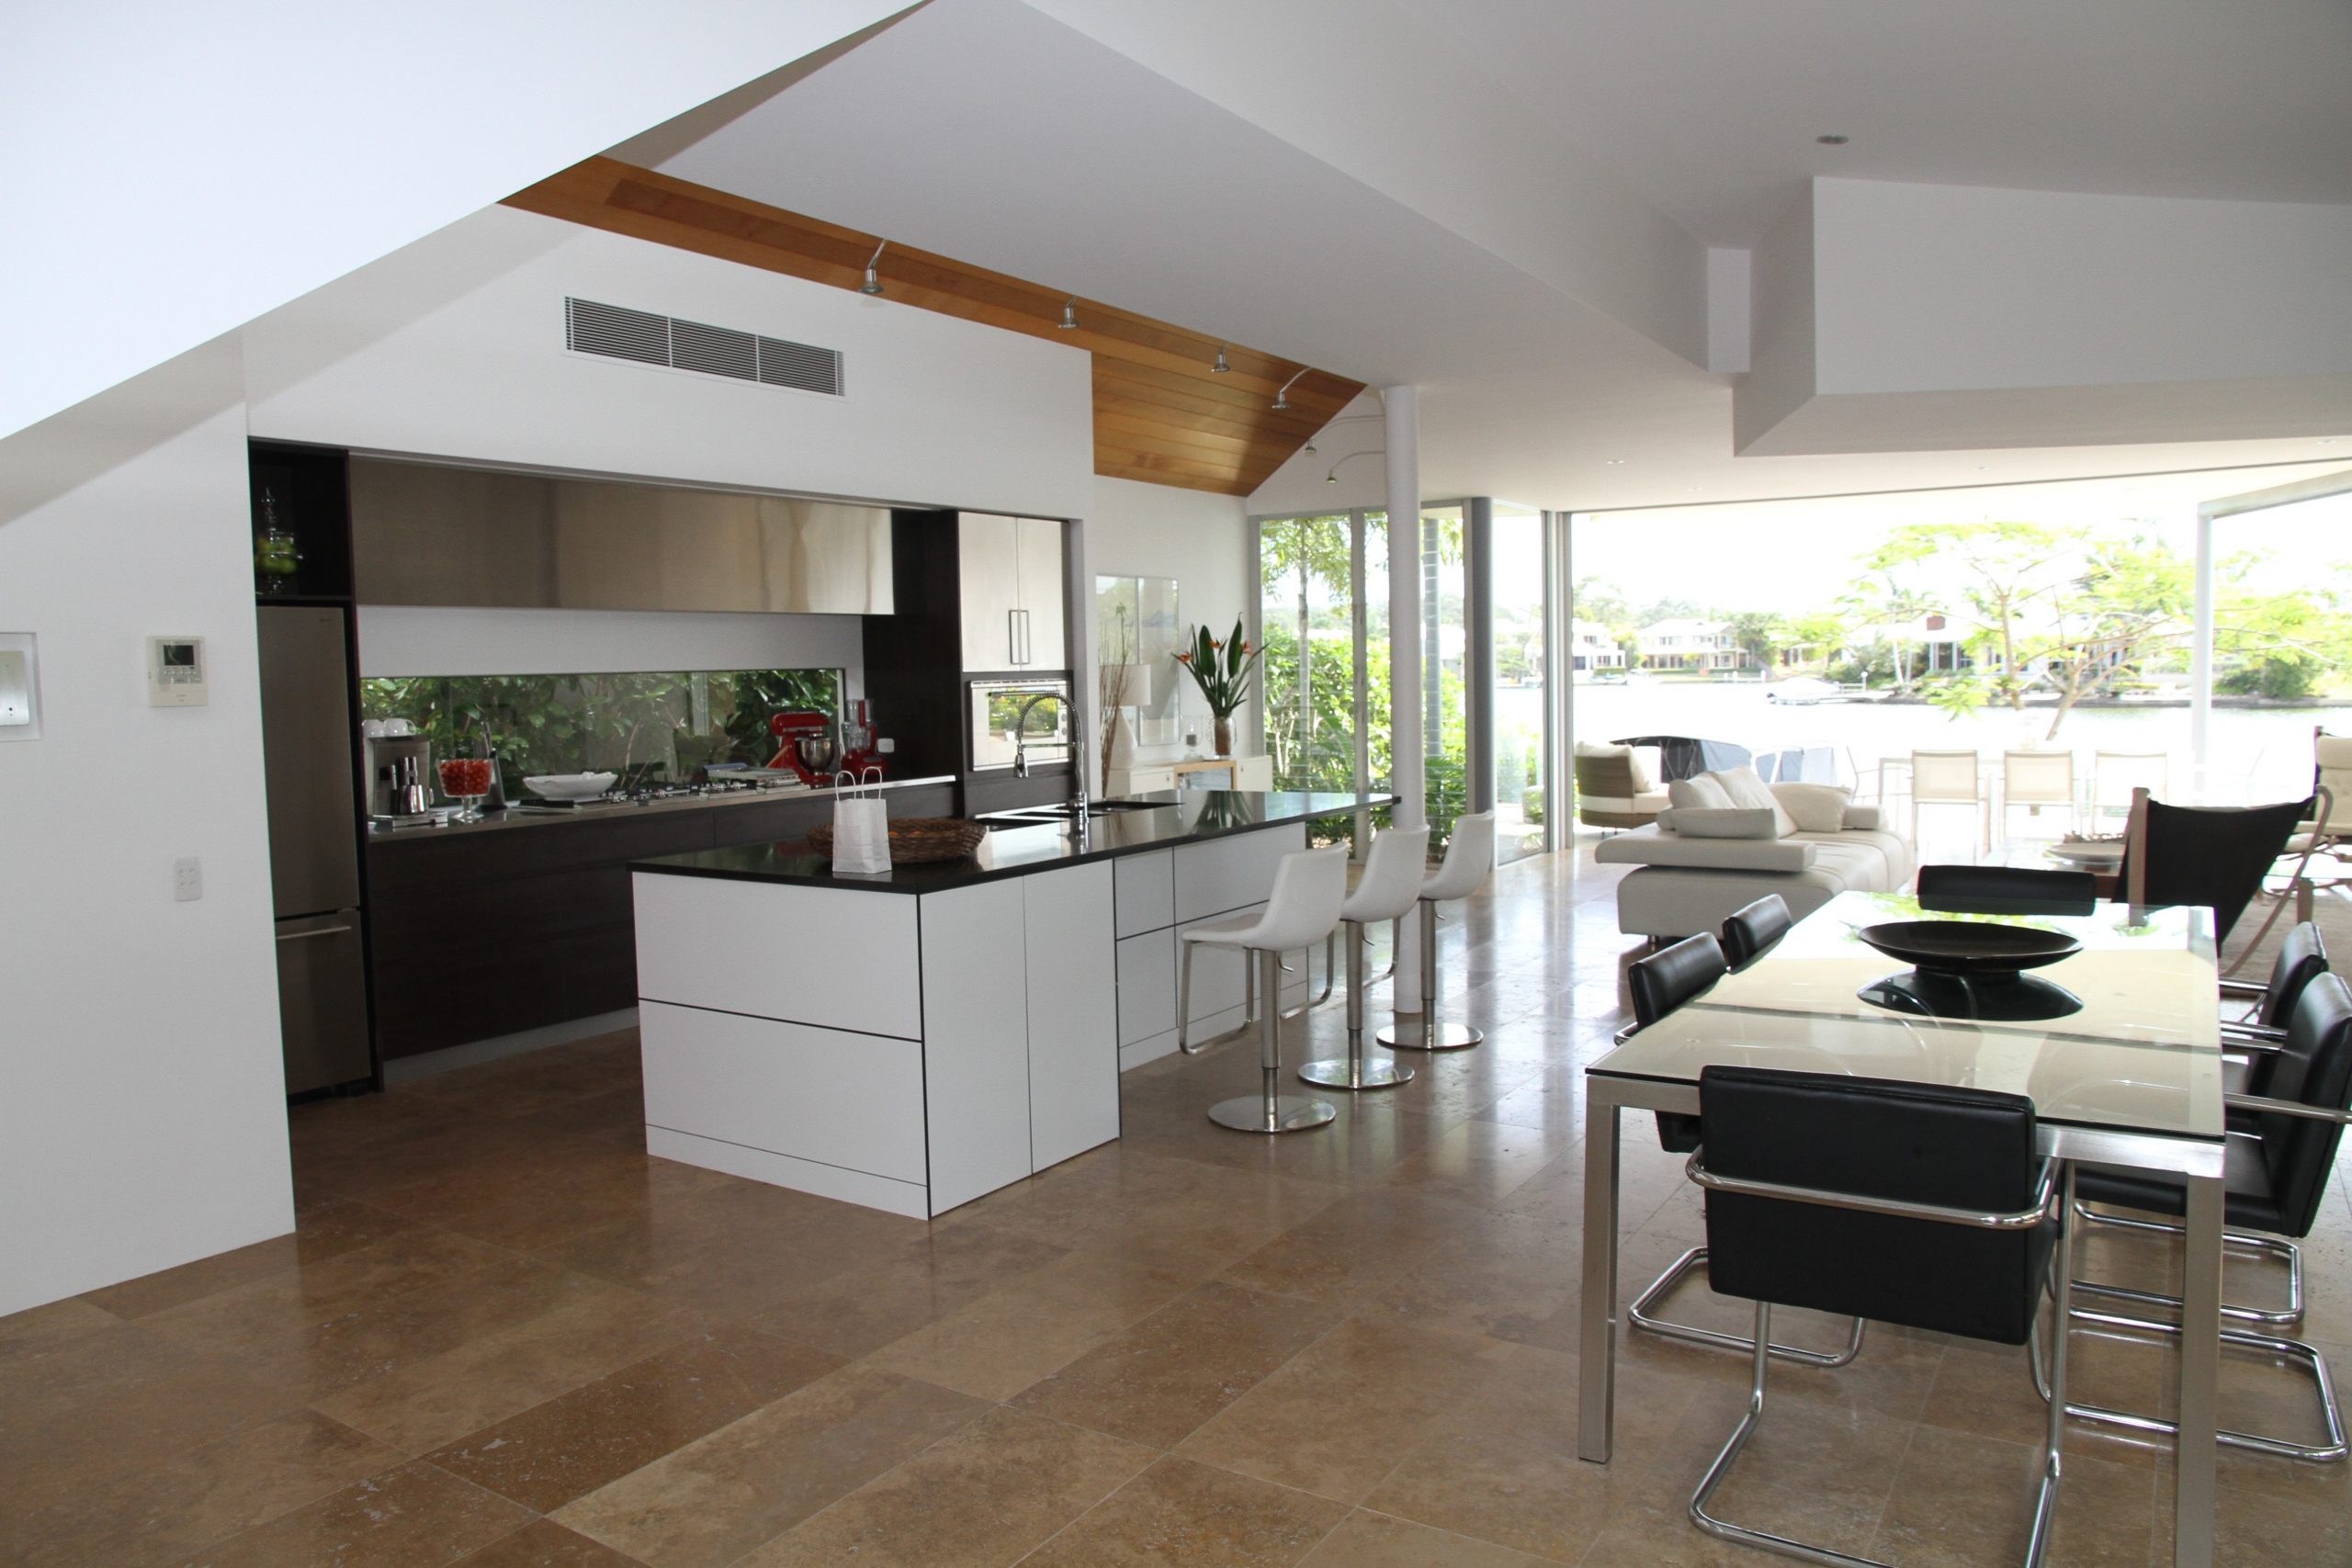 Functional kitchen solutions with an island